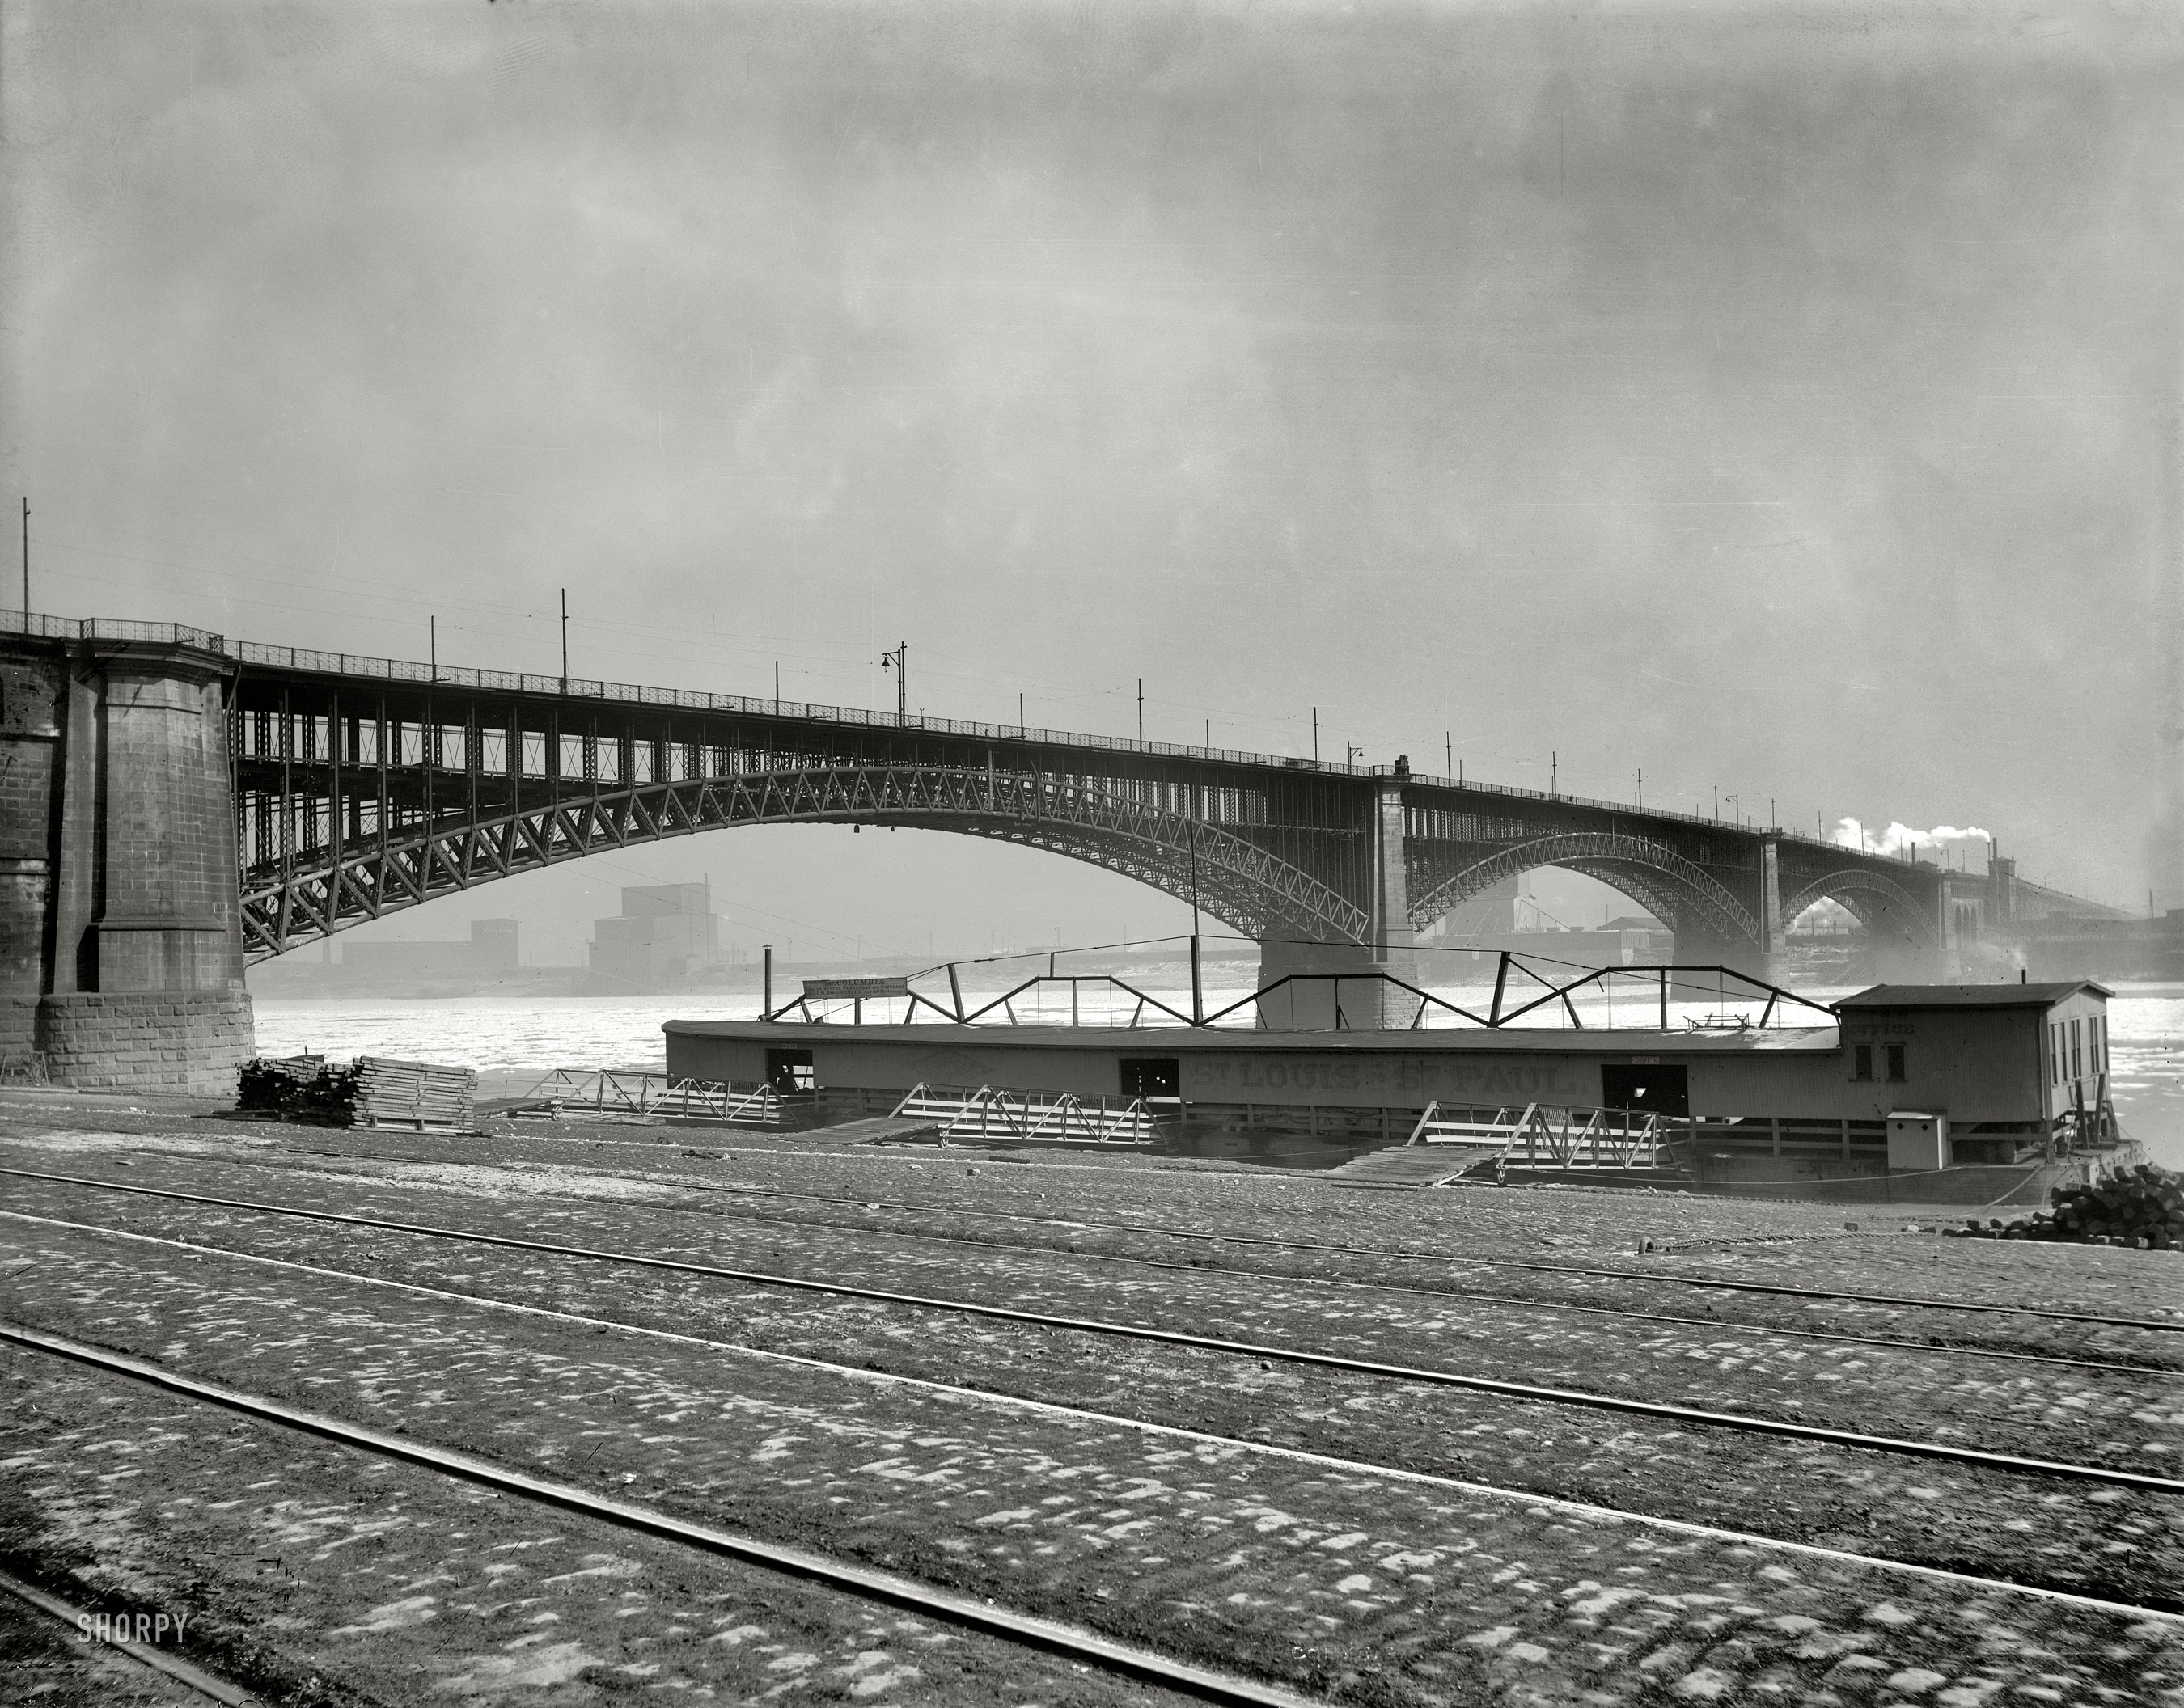 "Eads Bridge over the Mississippi at St. Louis, Missouri, 1901." 8x10 inch dry plate glass negative, Detroit Publishing Company. View full size.